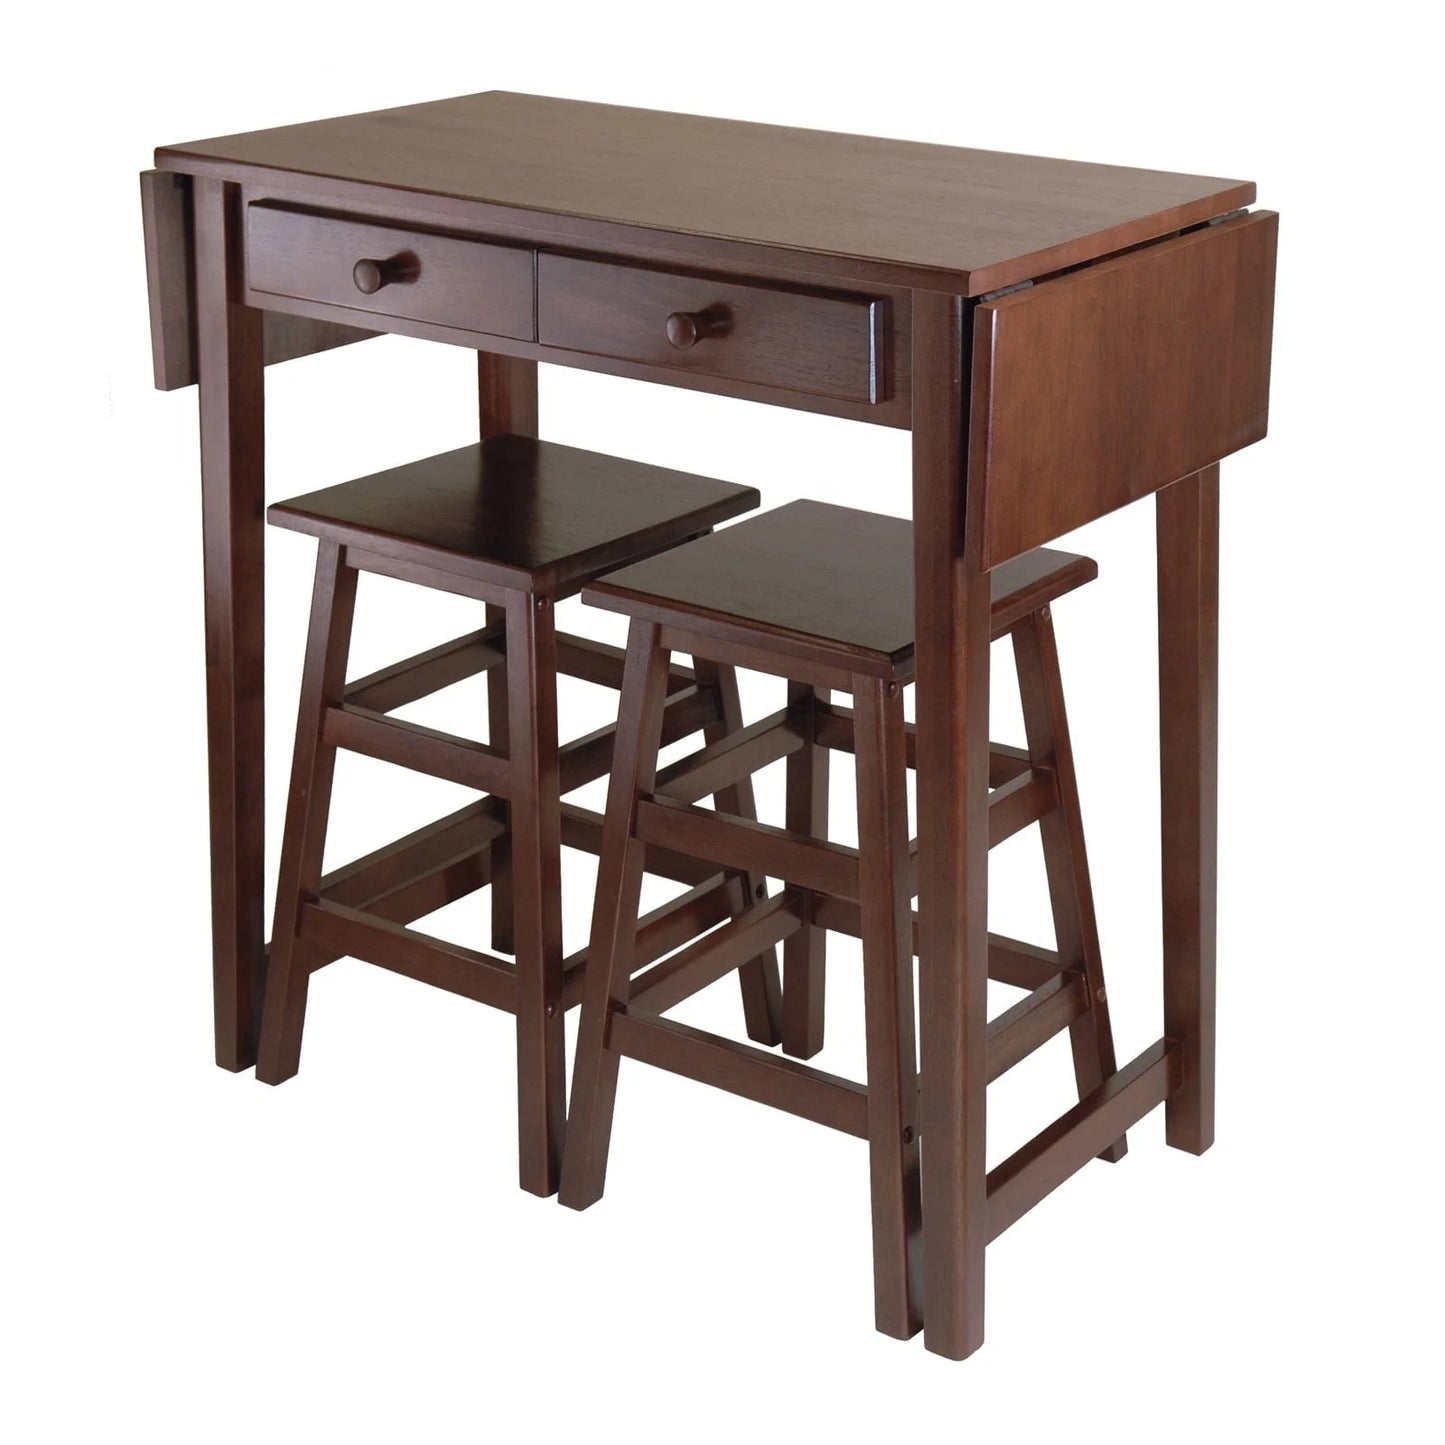 WINSOME Pub Table Set Mercer 3-Pc Drop Leaf Island with Square Seat Counter Stools, Cappuccino